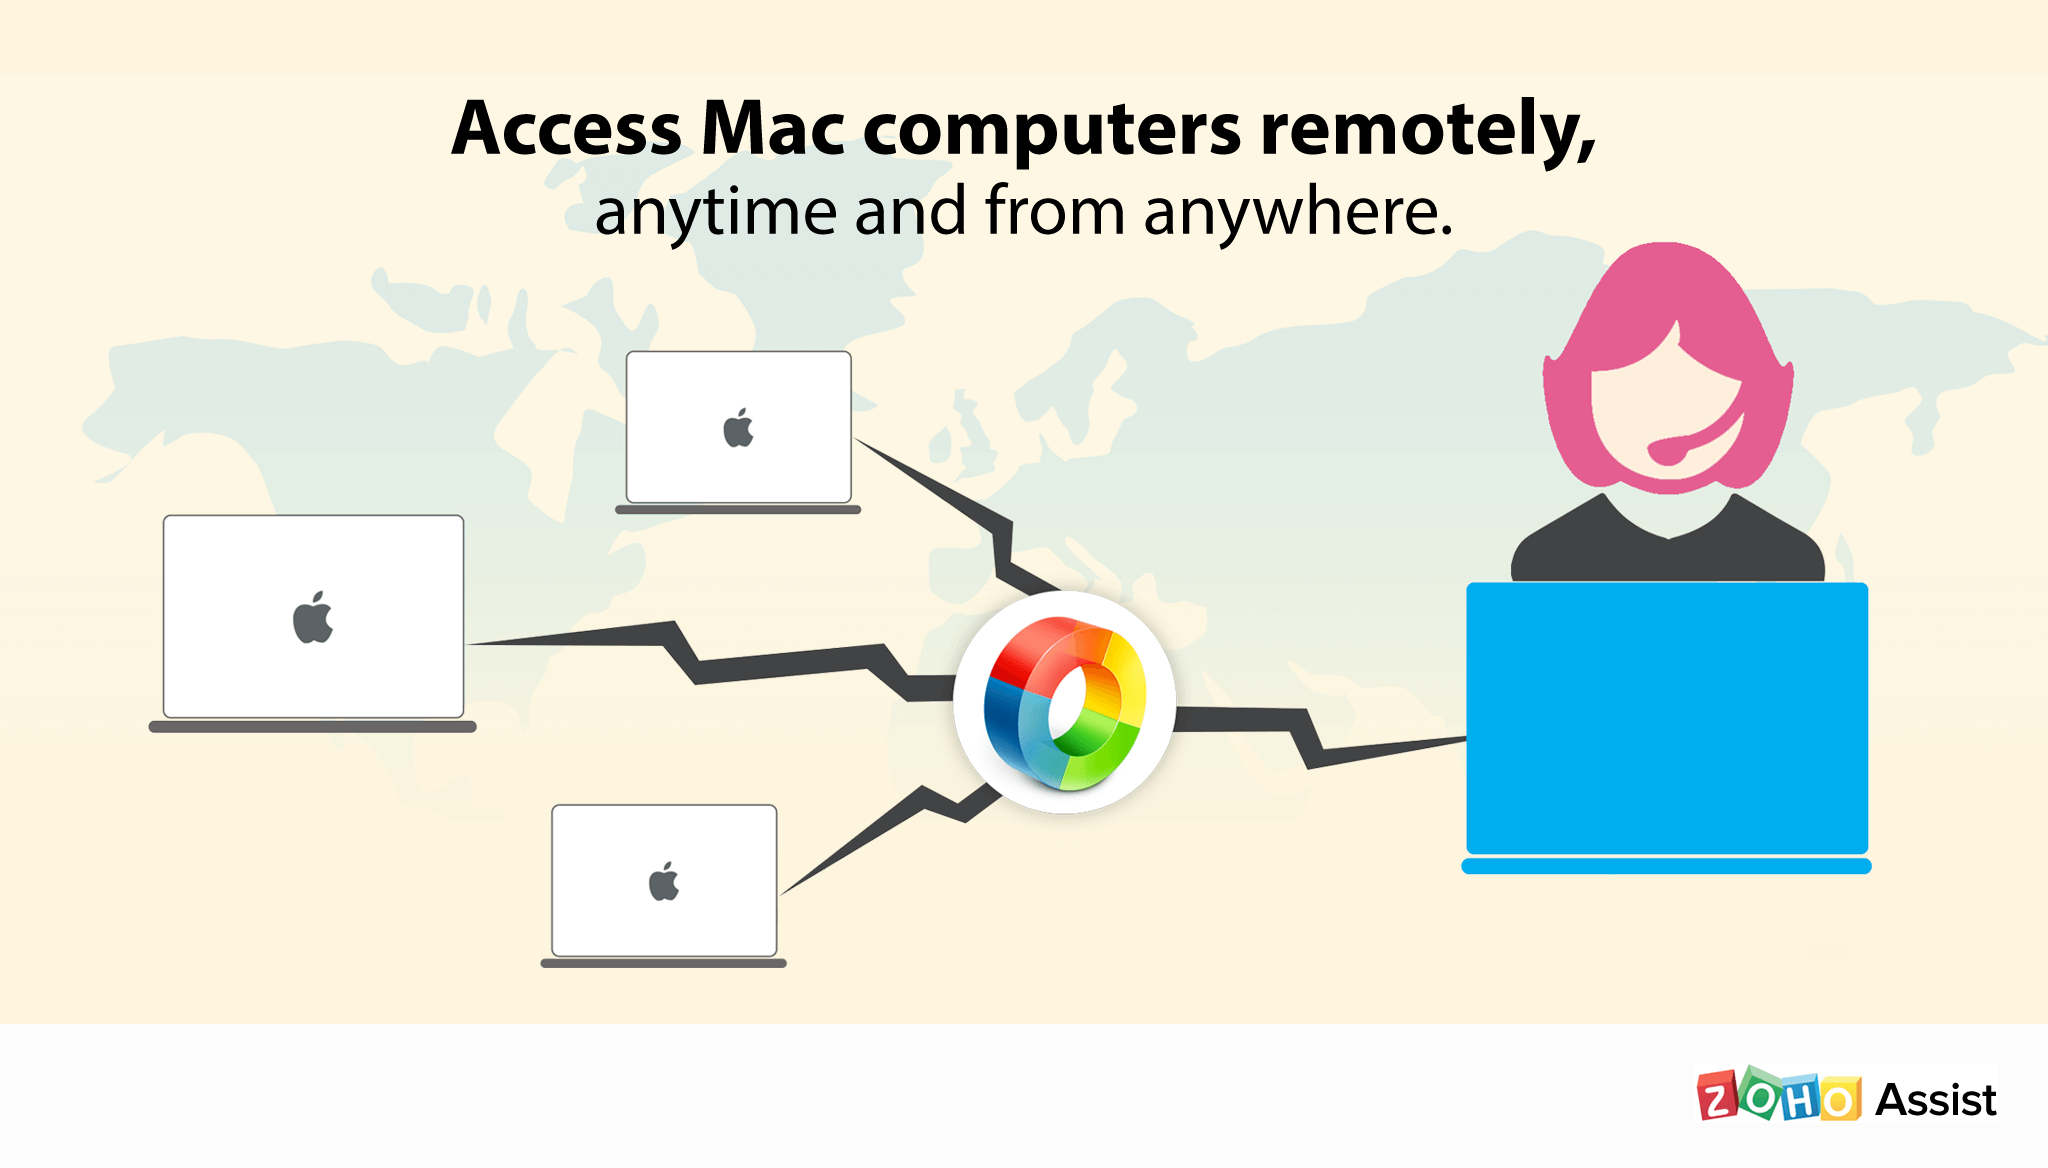 Access Mac computers remotely, anytime and from anywhere.